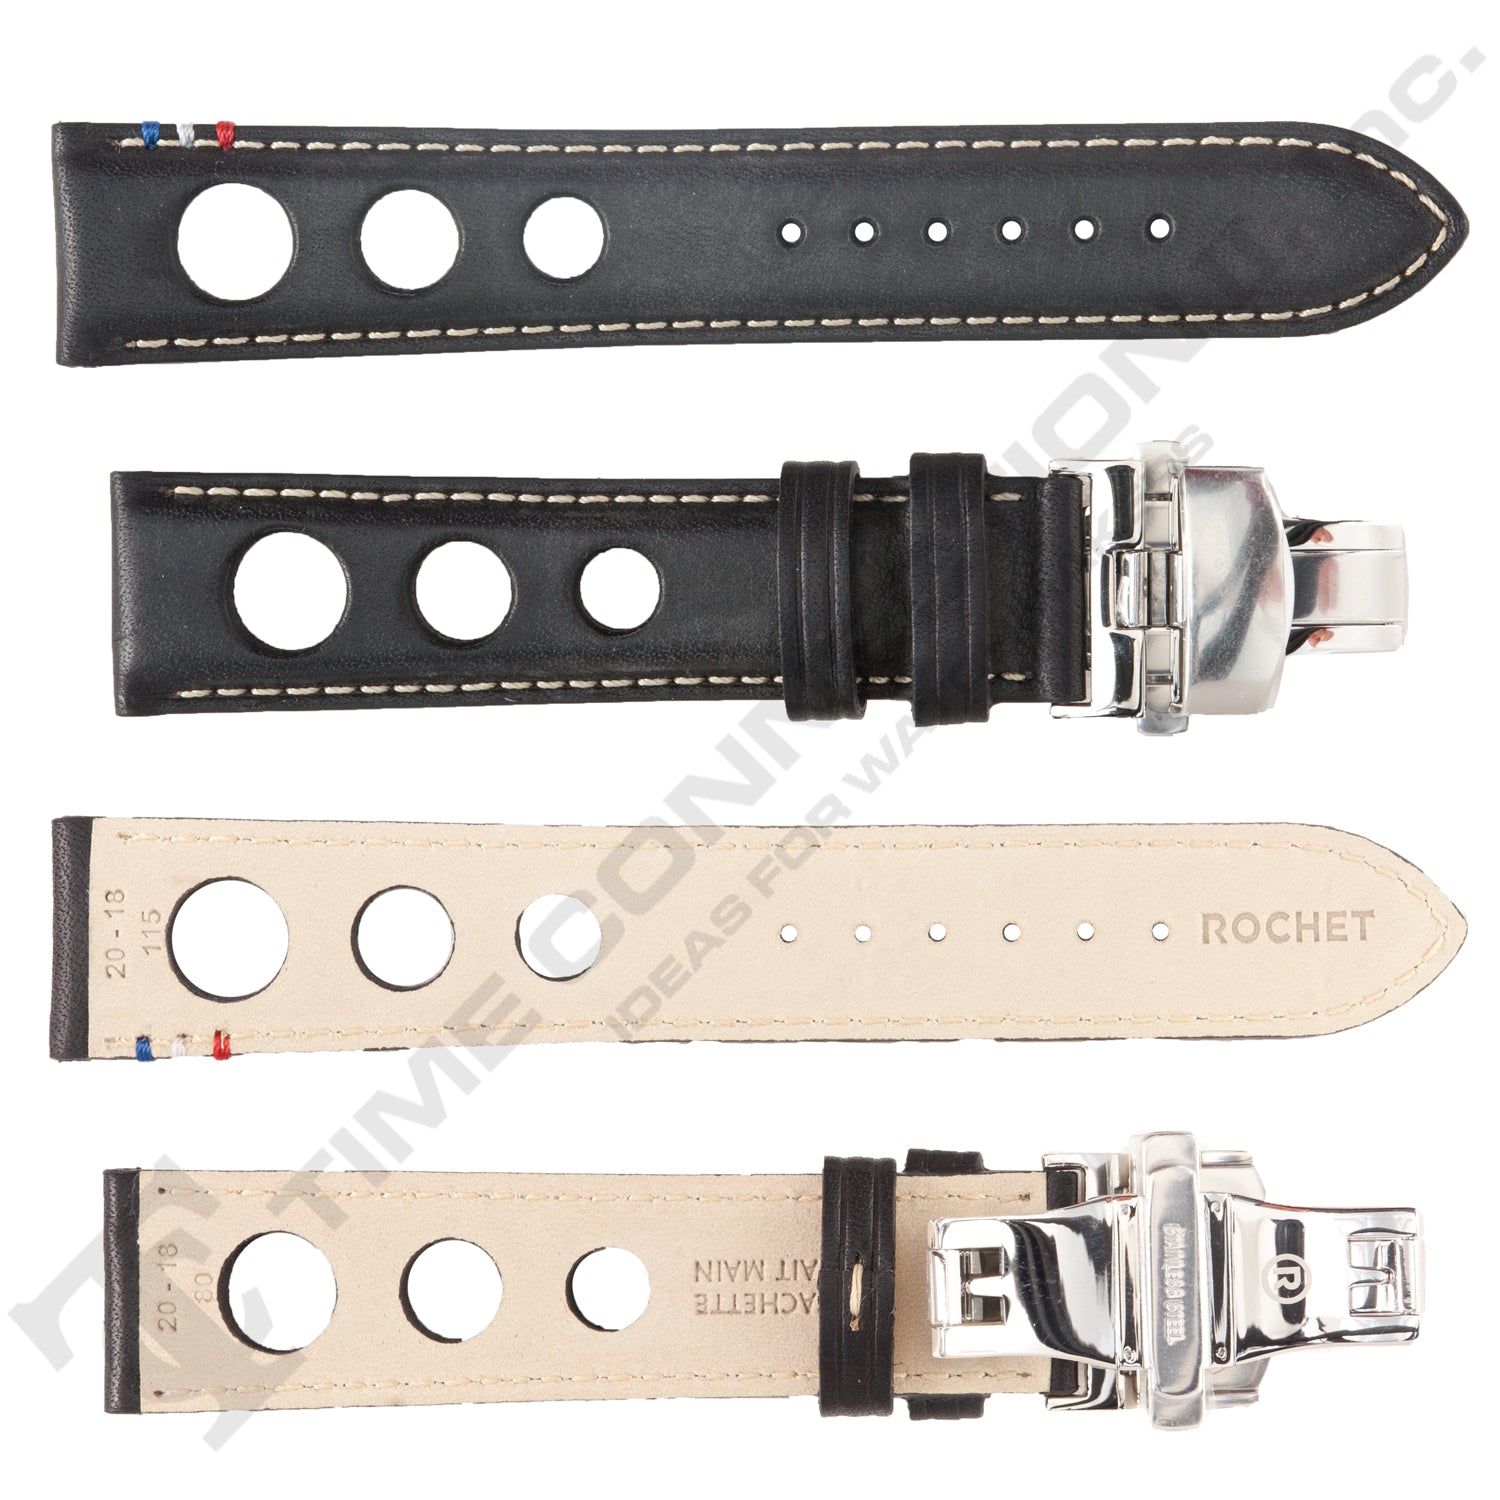 ZRC No. 793 Cowhide Grain Butterfly Deployment Buckle Leather Straps (20 - 22mm)